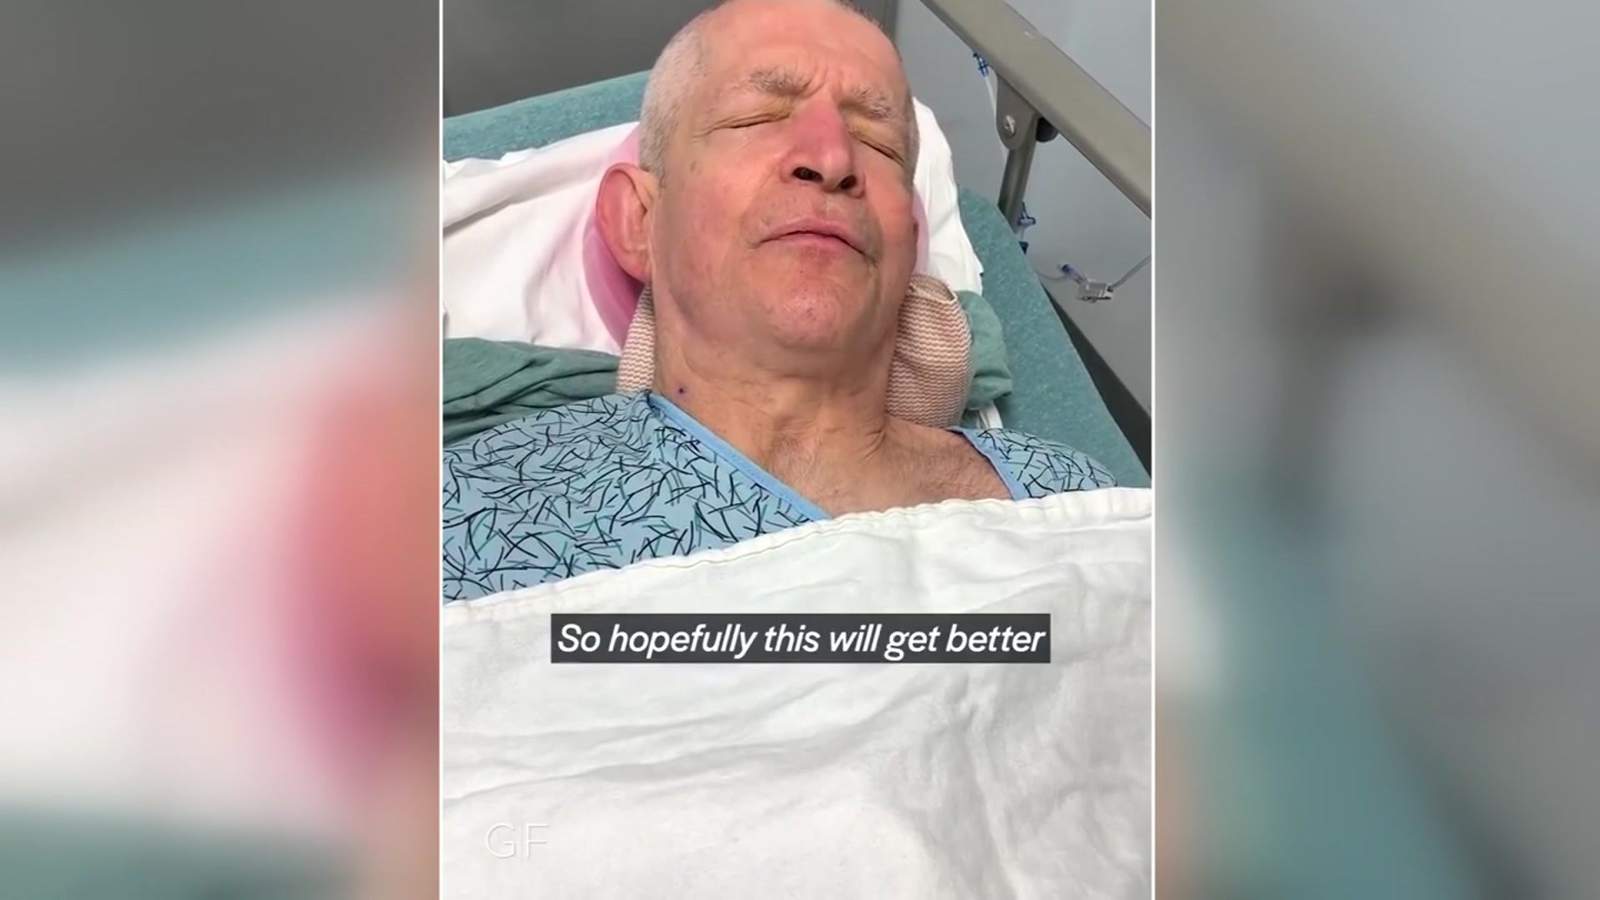 Mattress Mack recovering from neck procedure, posts video from hospital bed